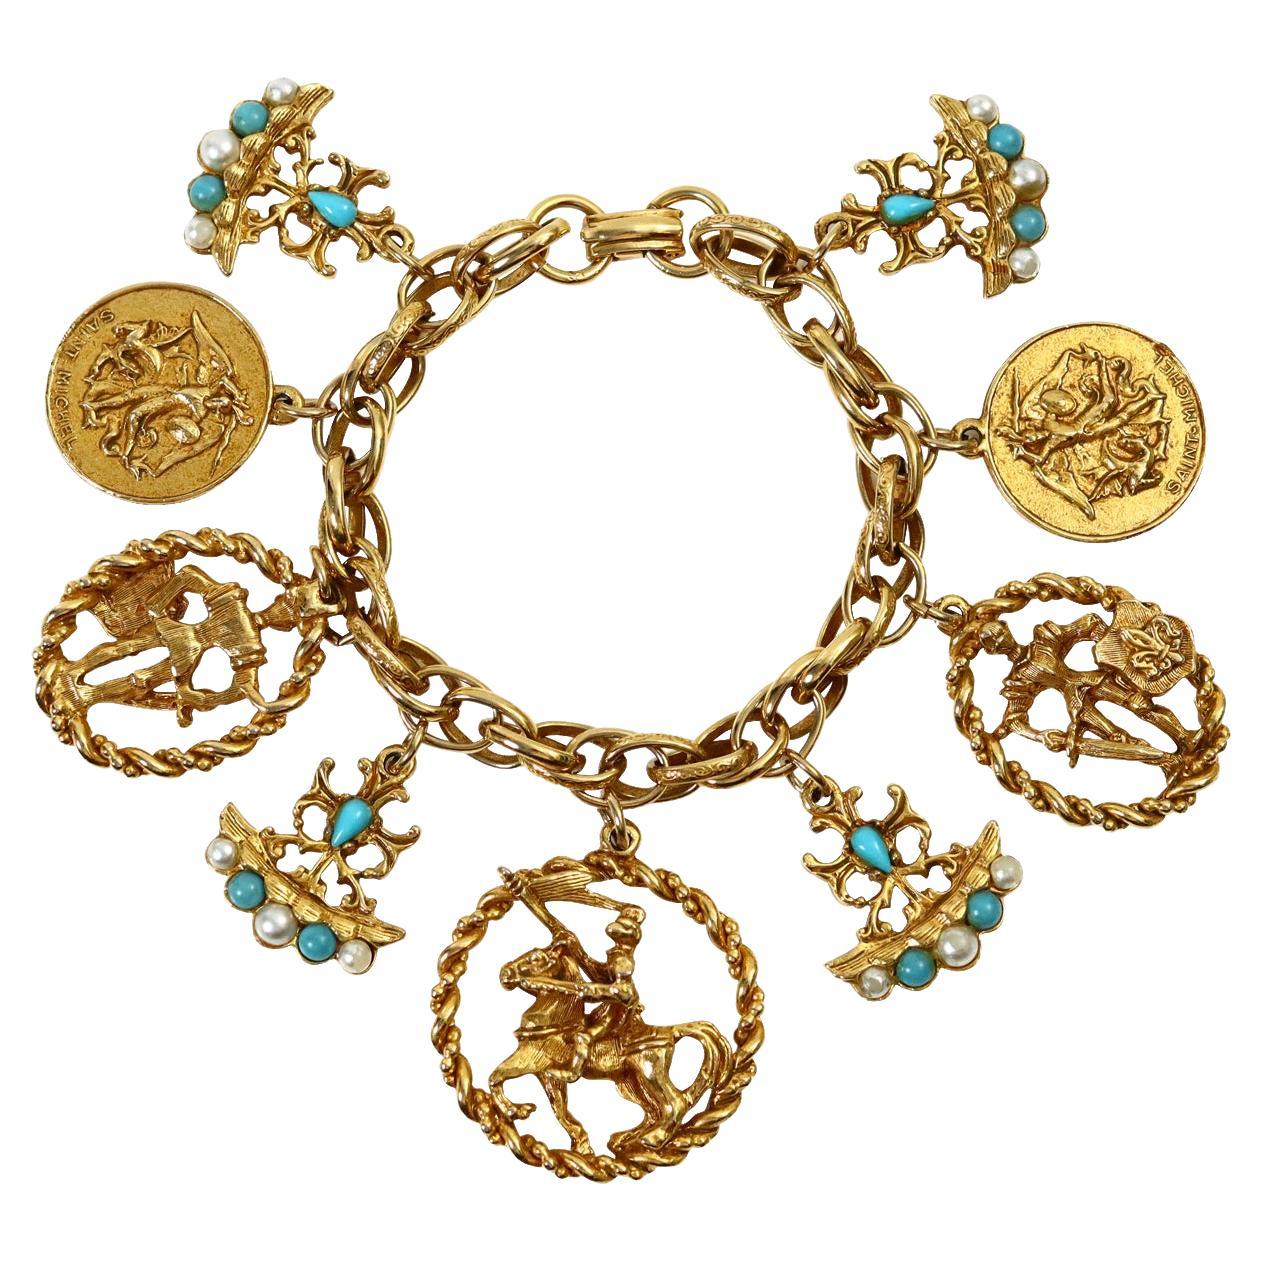 Vintage Gold and Faux Turquoise Charm Bracelet Circa 1980's.  This charm bracelet features charms that have various coat of arms motifs. The pop comes from three arms that have faux turquoise and faux pearls which really pop against the gold.  You